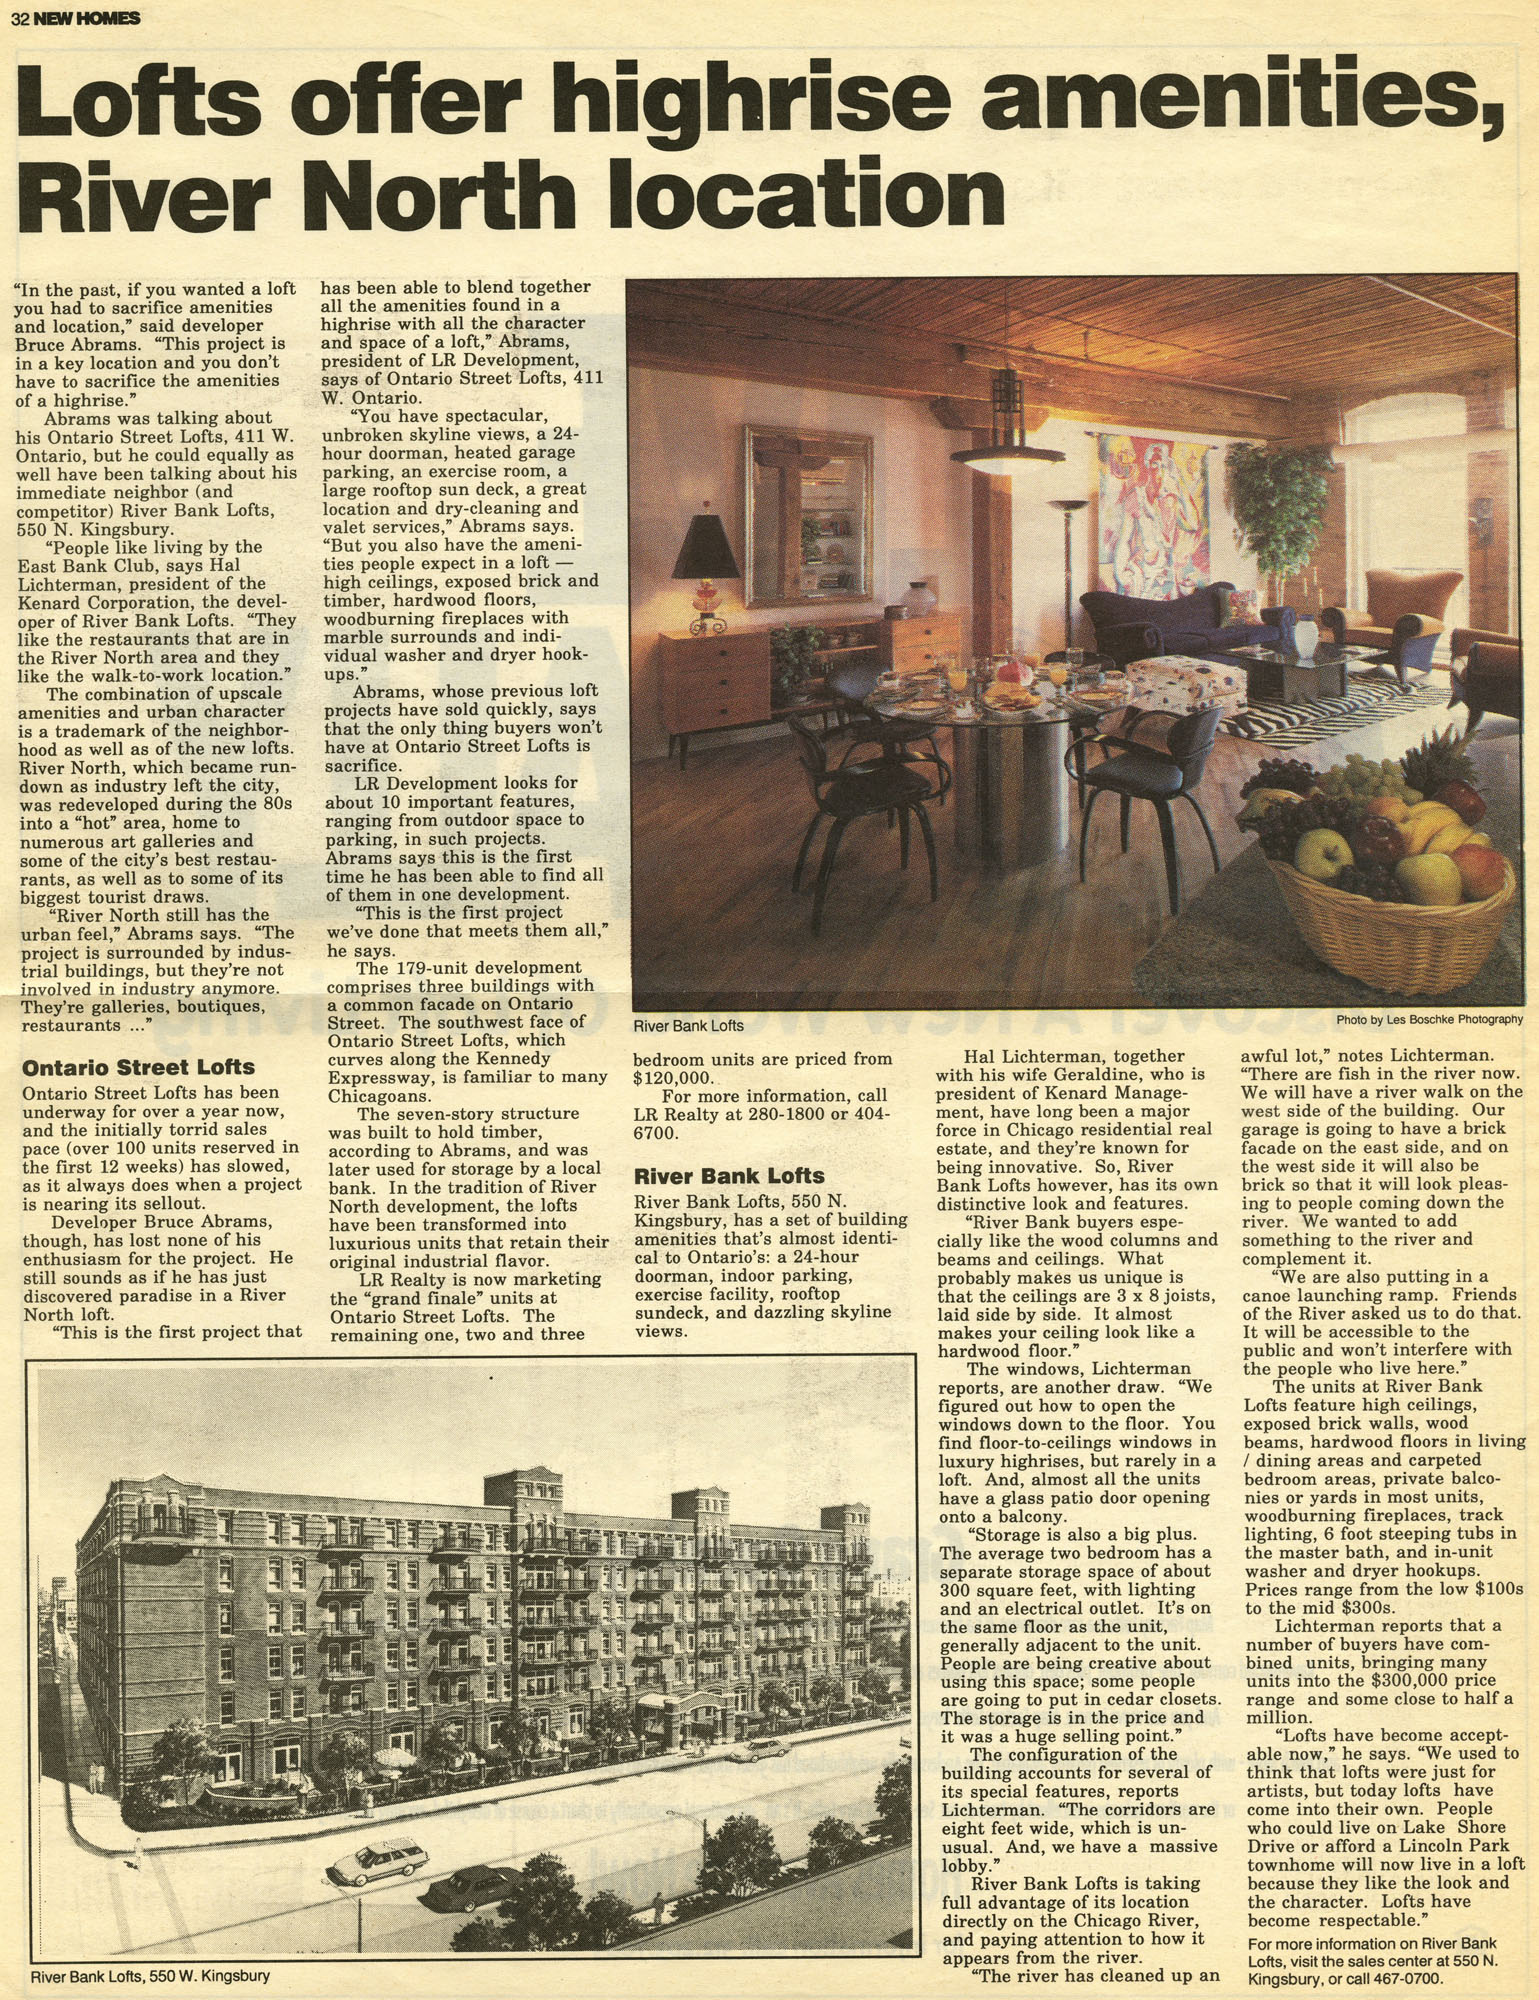 spring95, new homes- Lofts offer highrise amenities, River North location